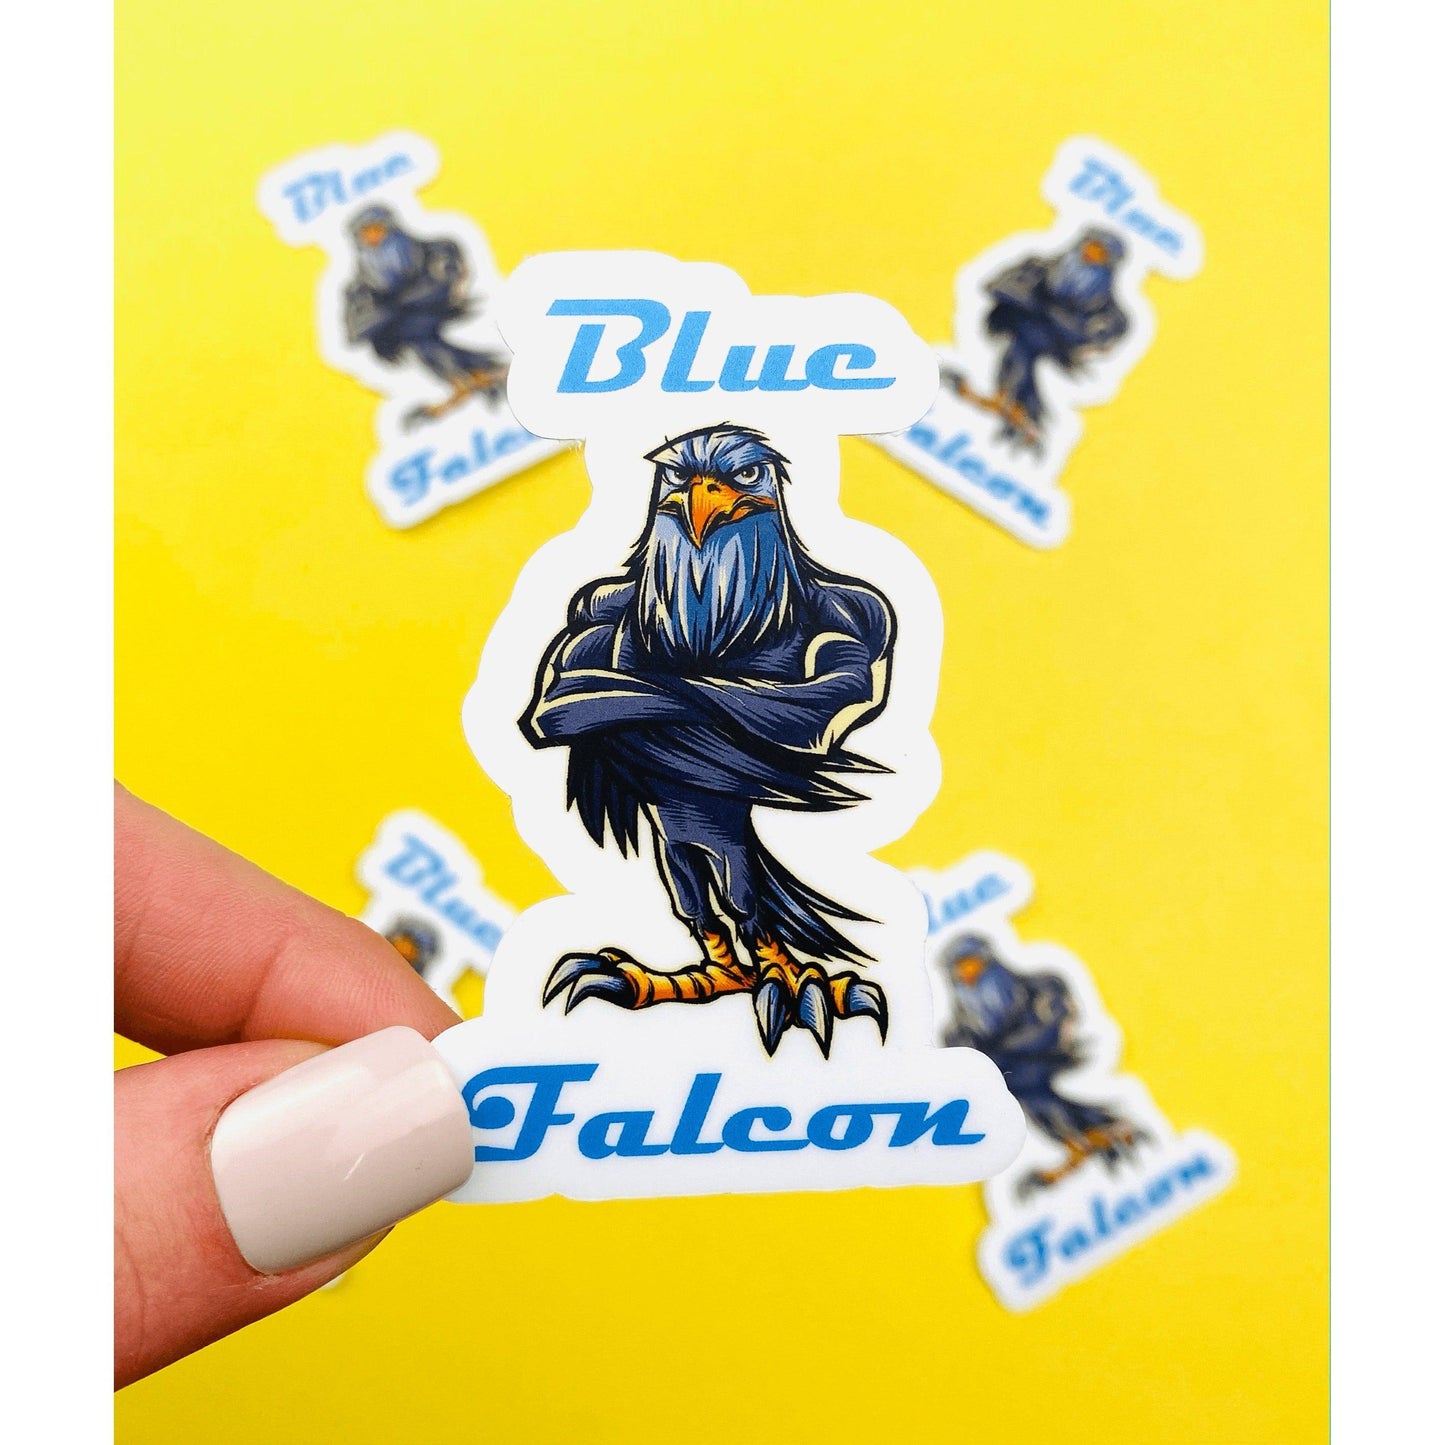 Blue Falcon Sticker for Police Law Enforcement Military Buddy - Ottos Grotto :: Stickers For Your Stuff